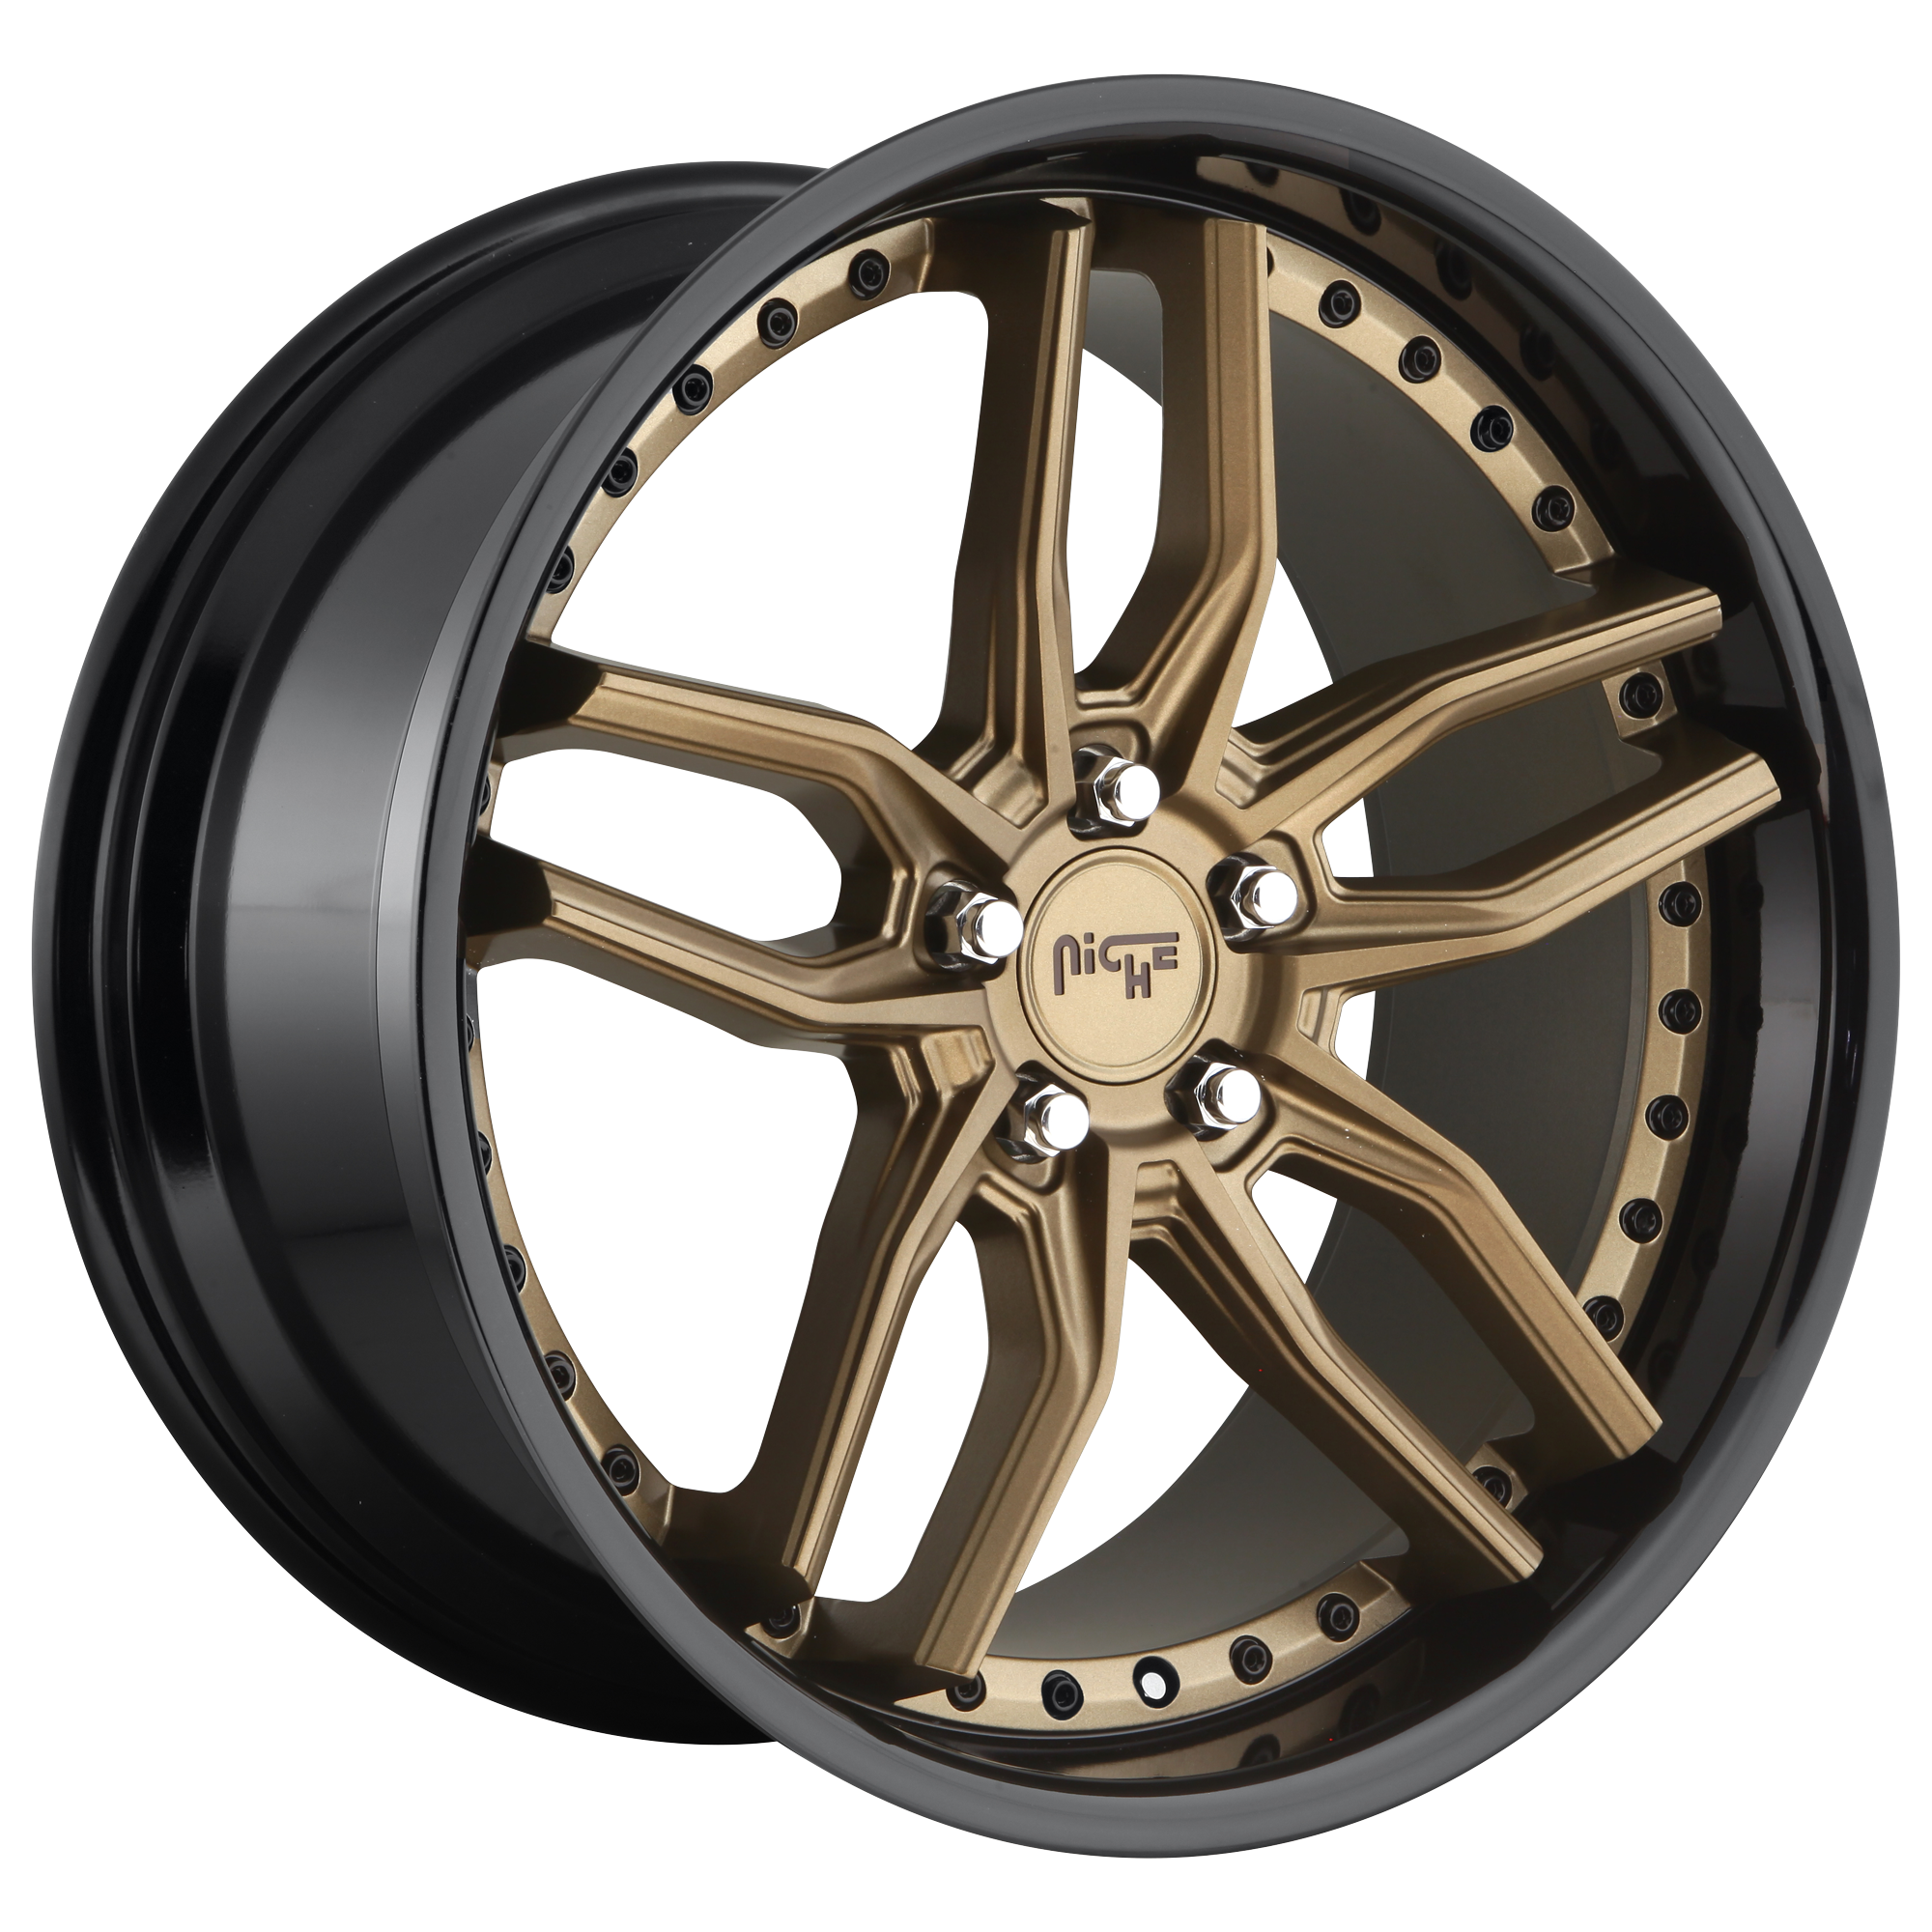 METHOS 19x9.5 5x114.30 MATTE BRONZE BLACK BEAD RING (35 mm) - Tires and Engine Performance